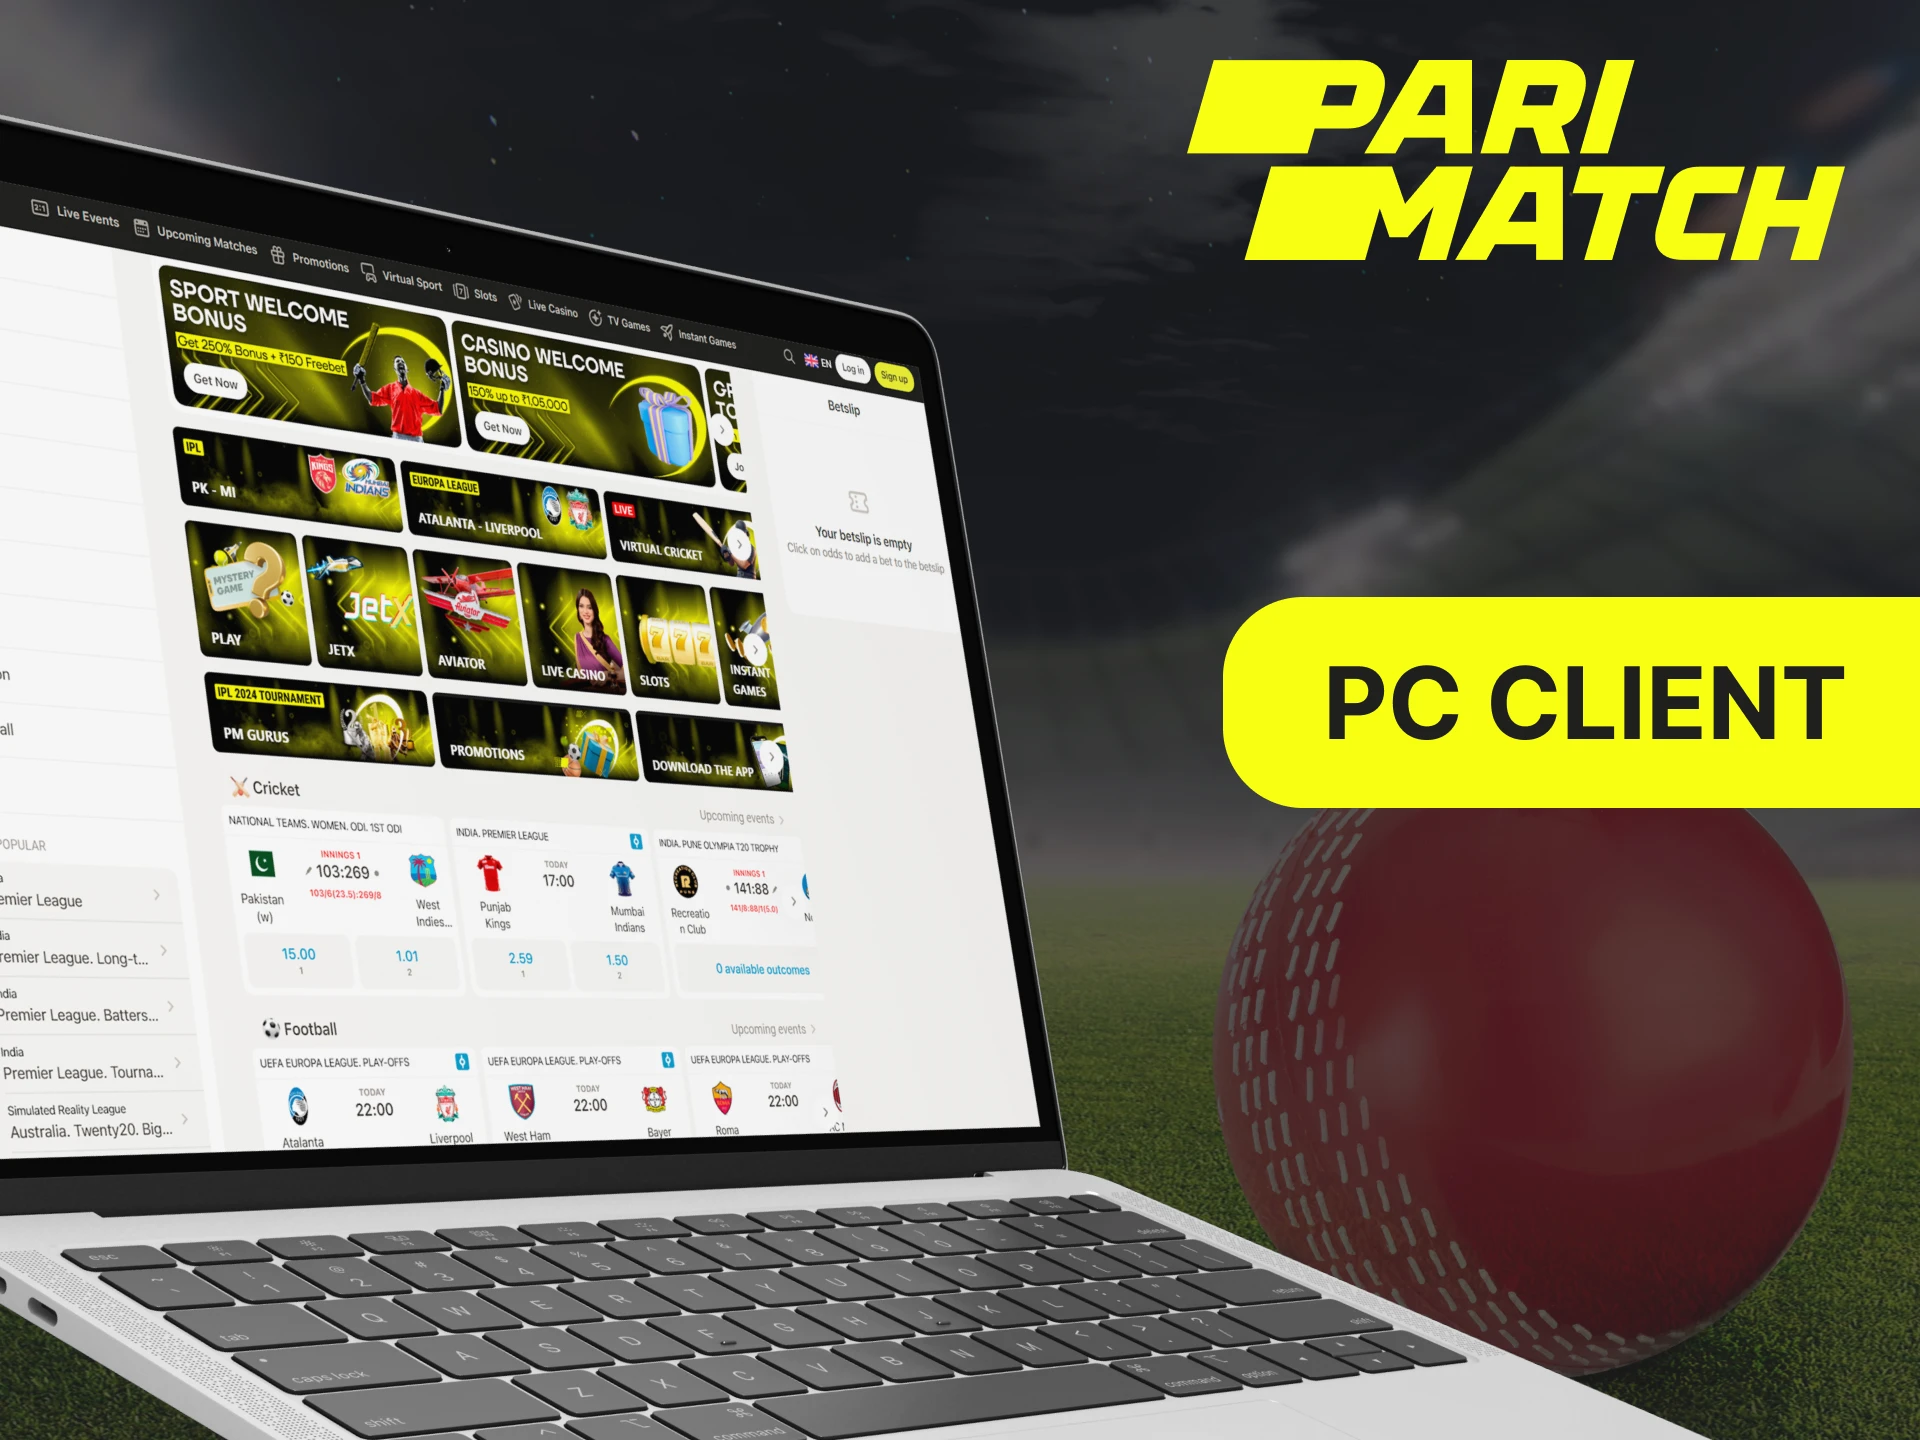 Download the Parimatch PC client for MacOS or Windows from their website.